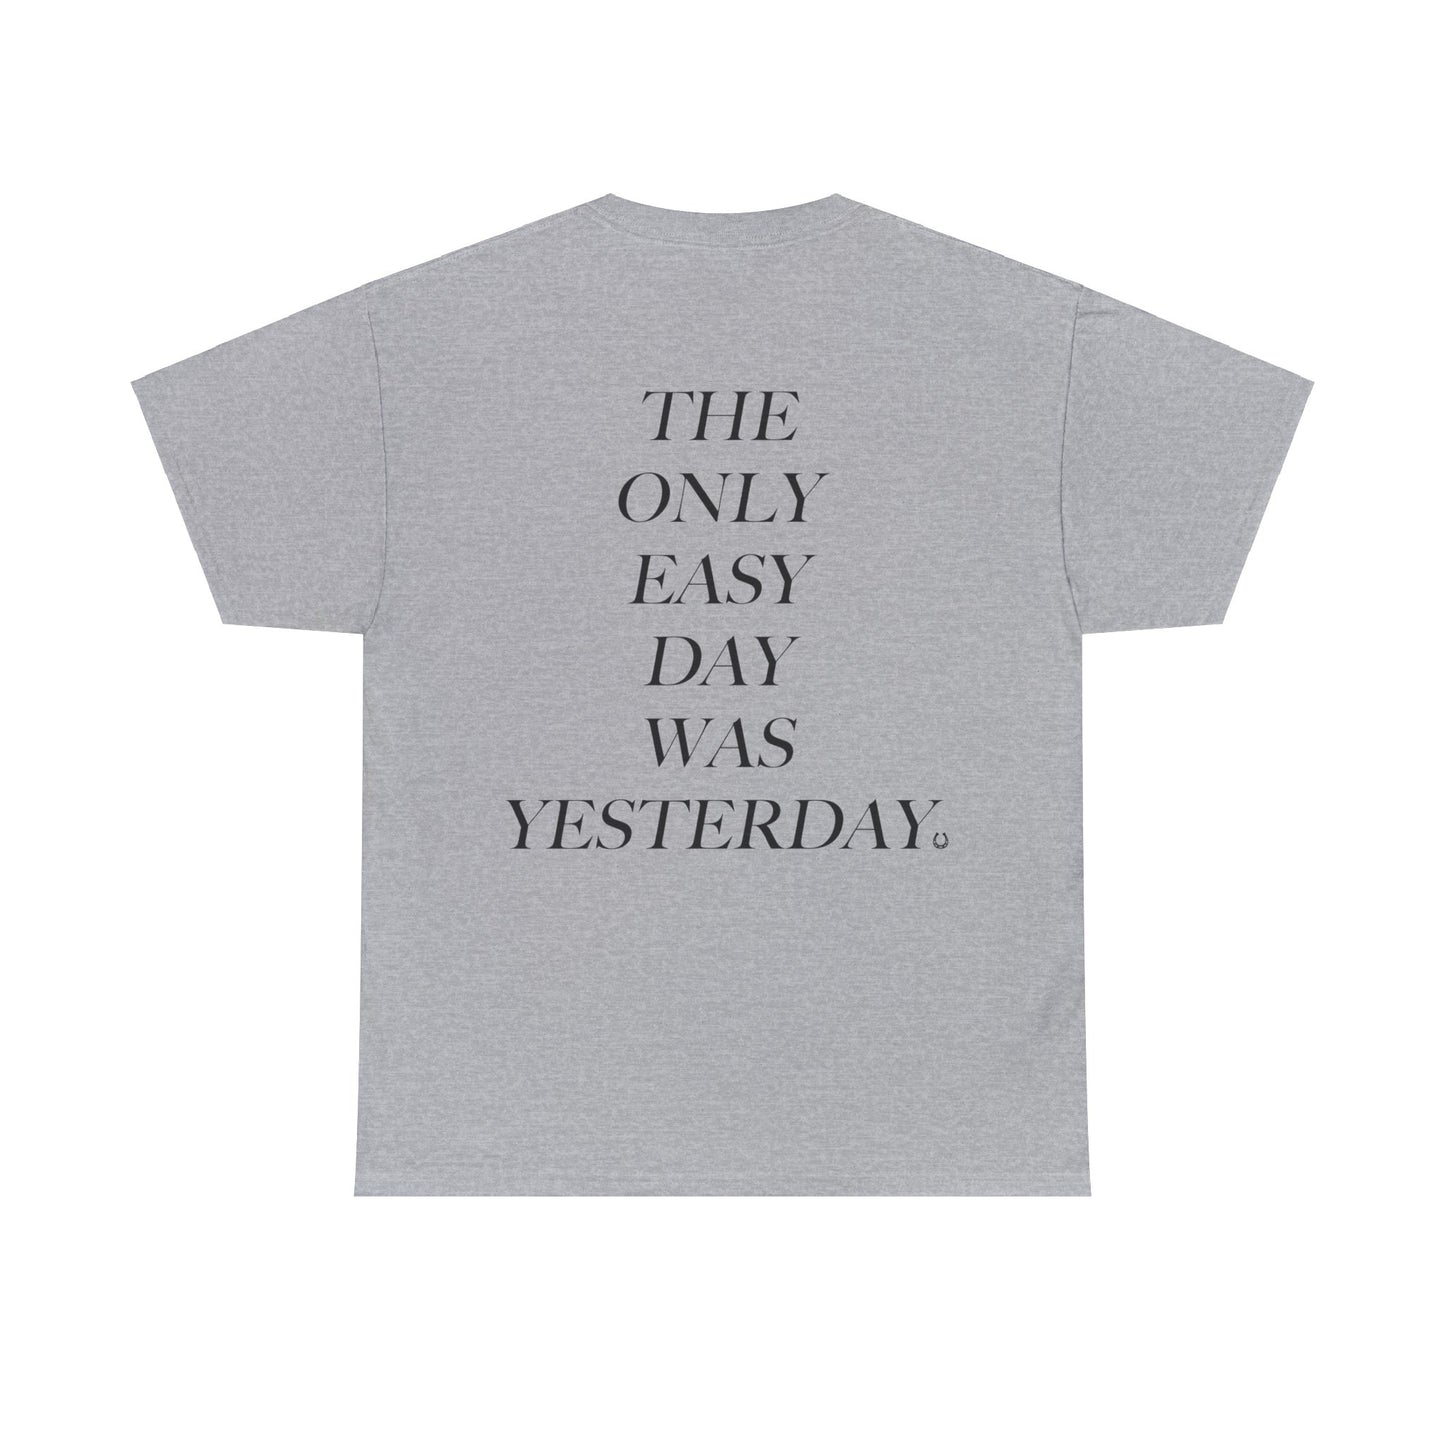 Sydney Sisil: The Only Easy Day Was Yesterday Tee